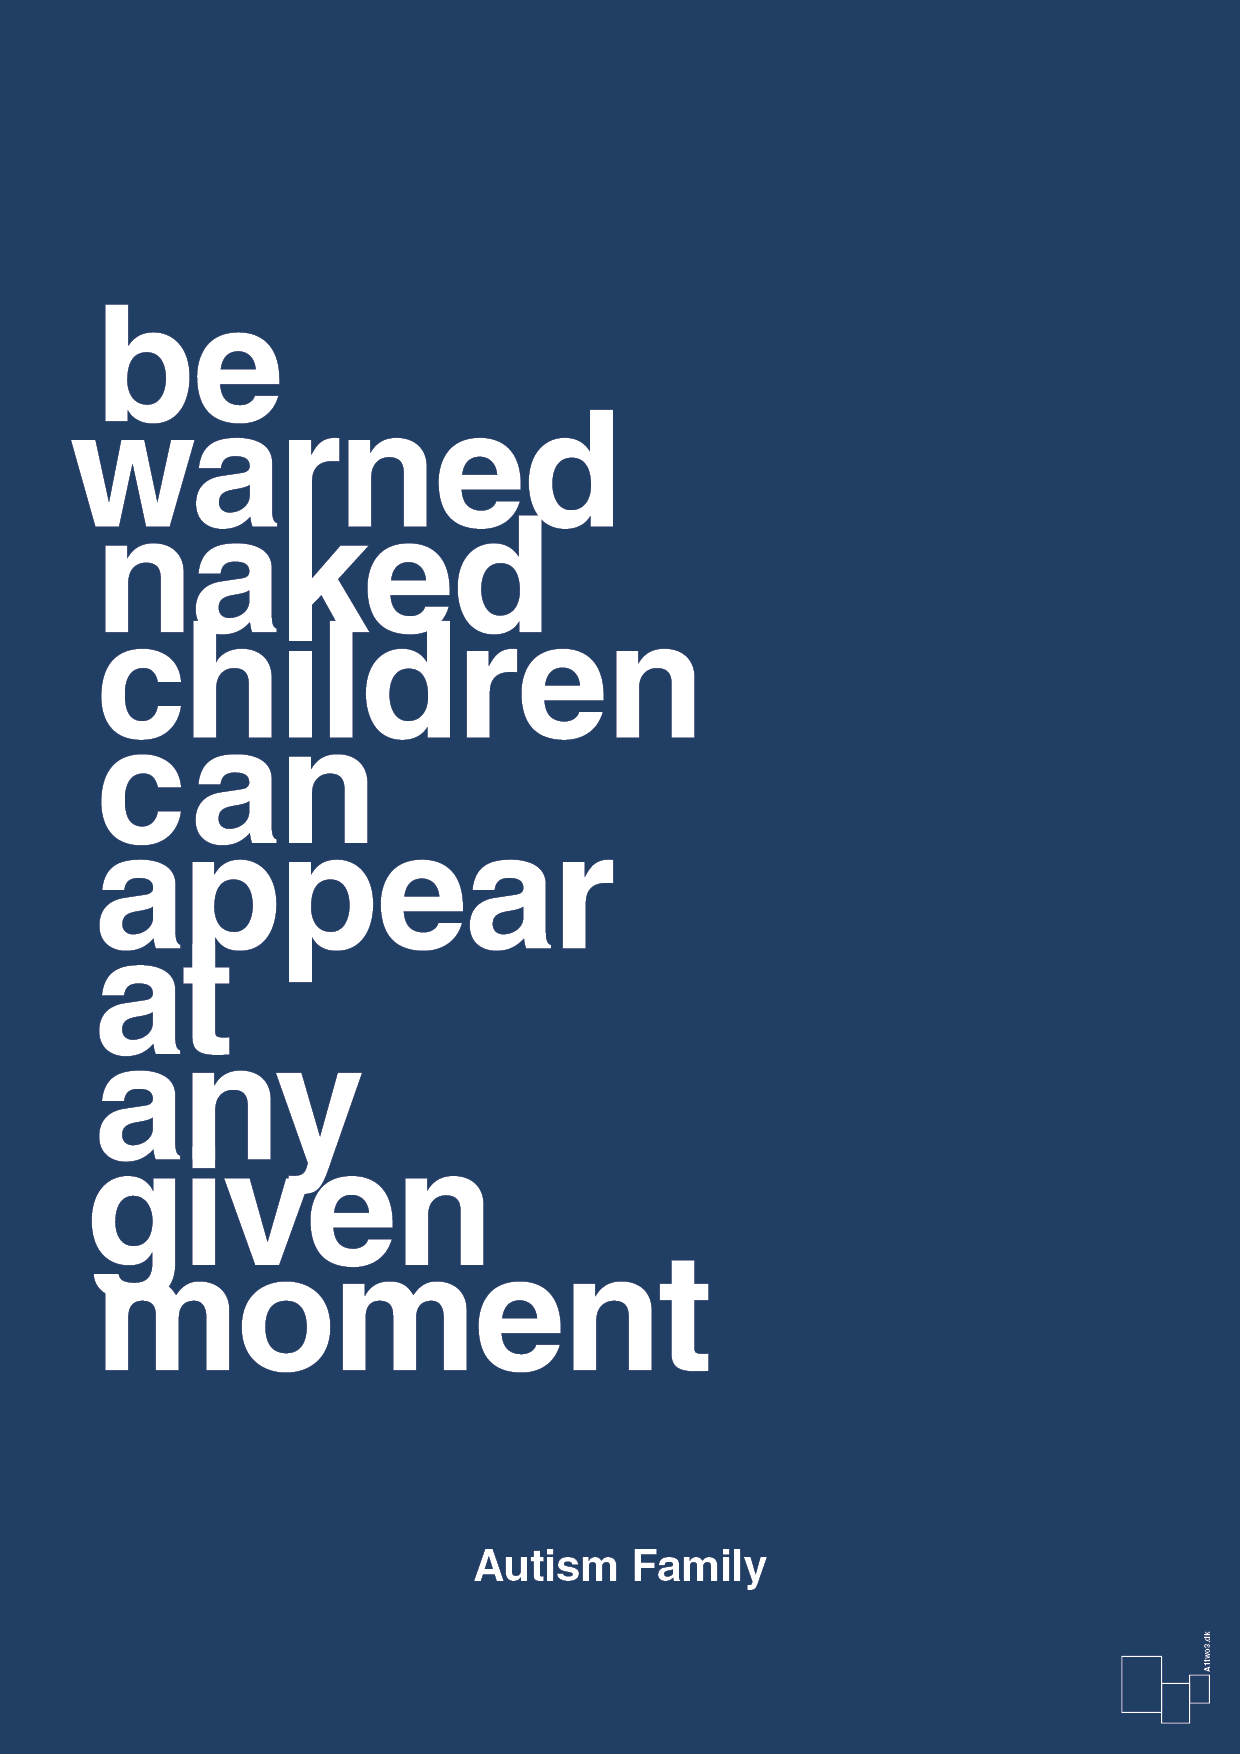 be warned naked children can appear at any given moment - Plakat med Samfund i Lapis Blue